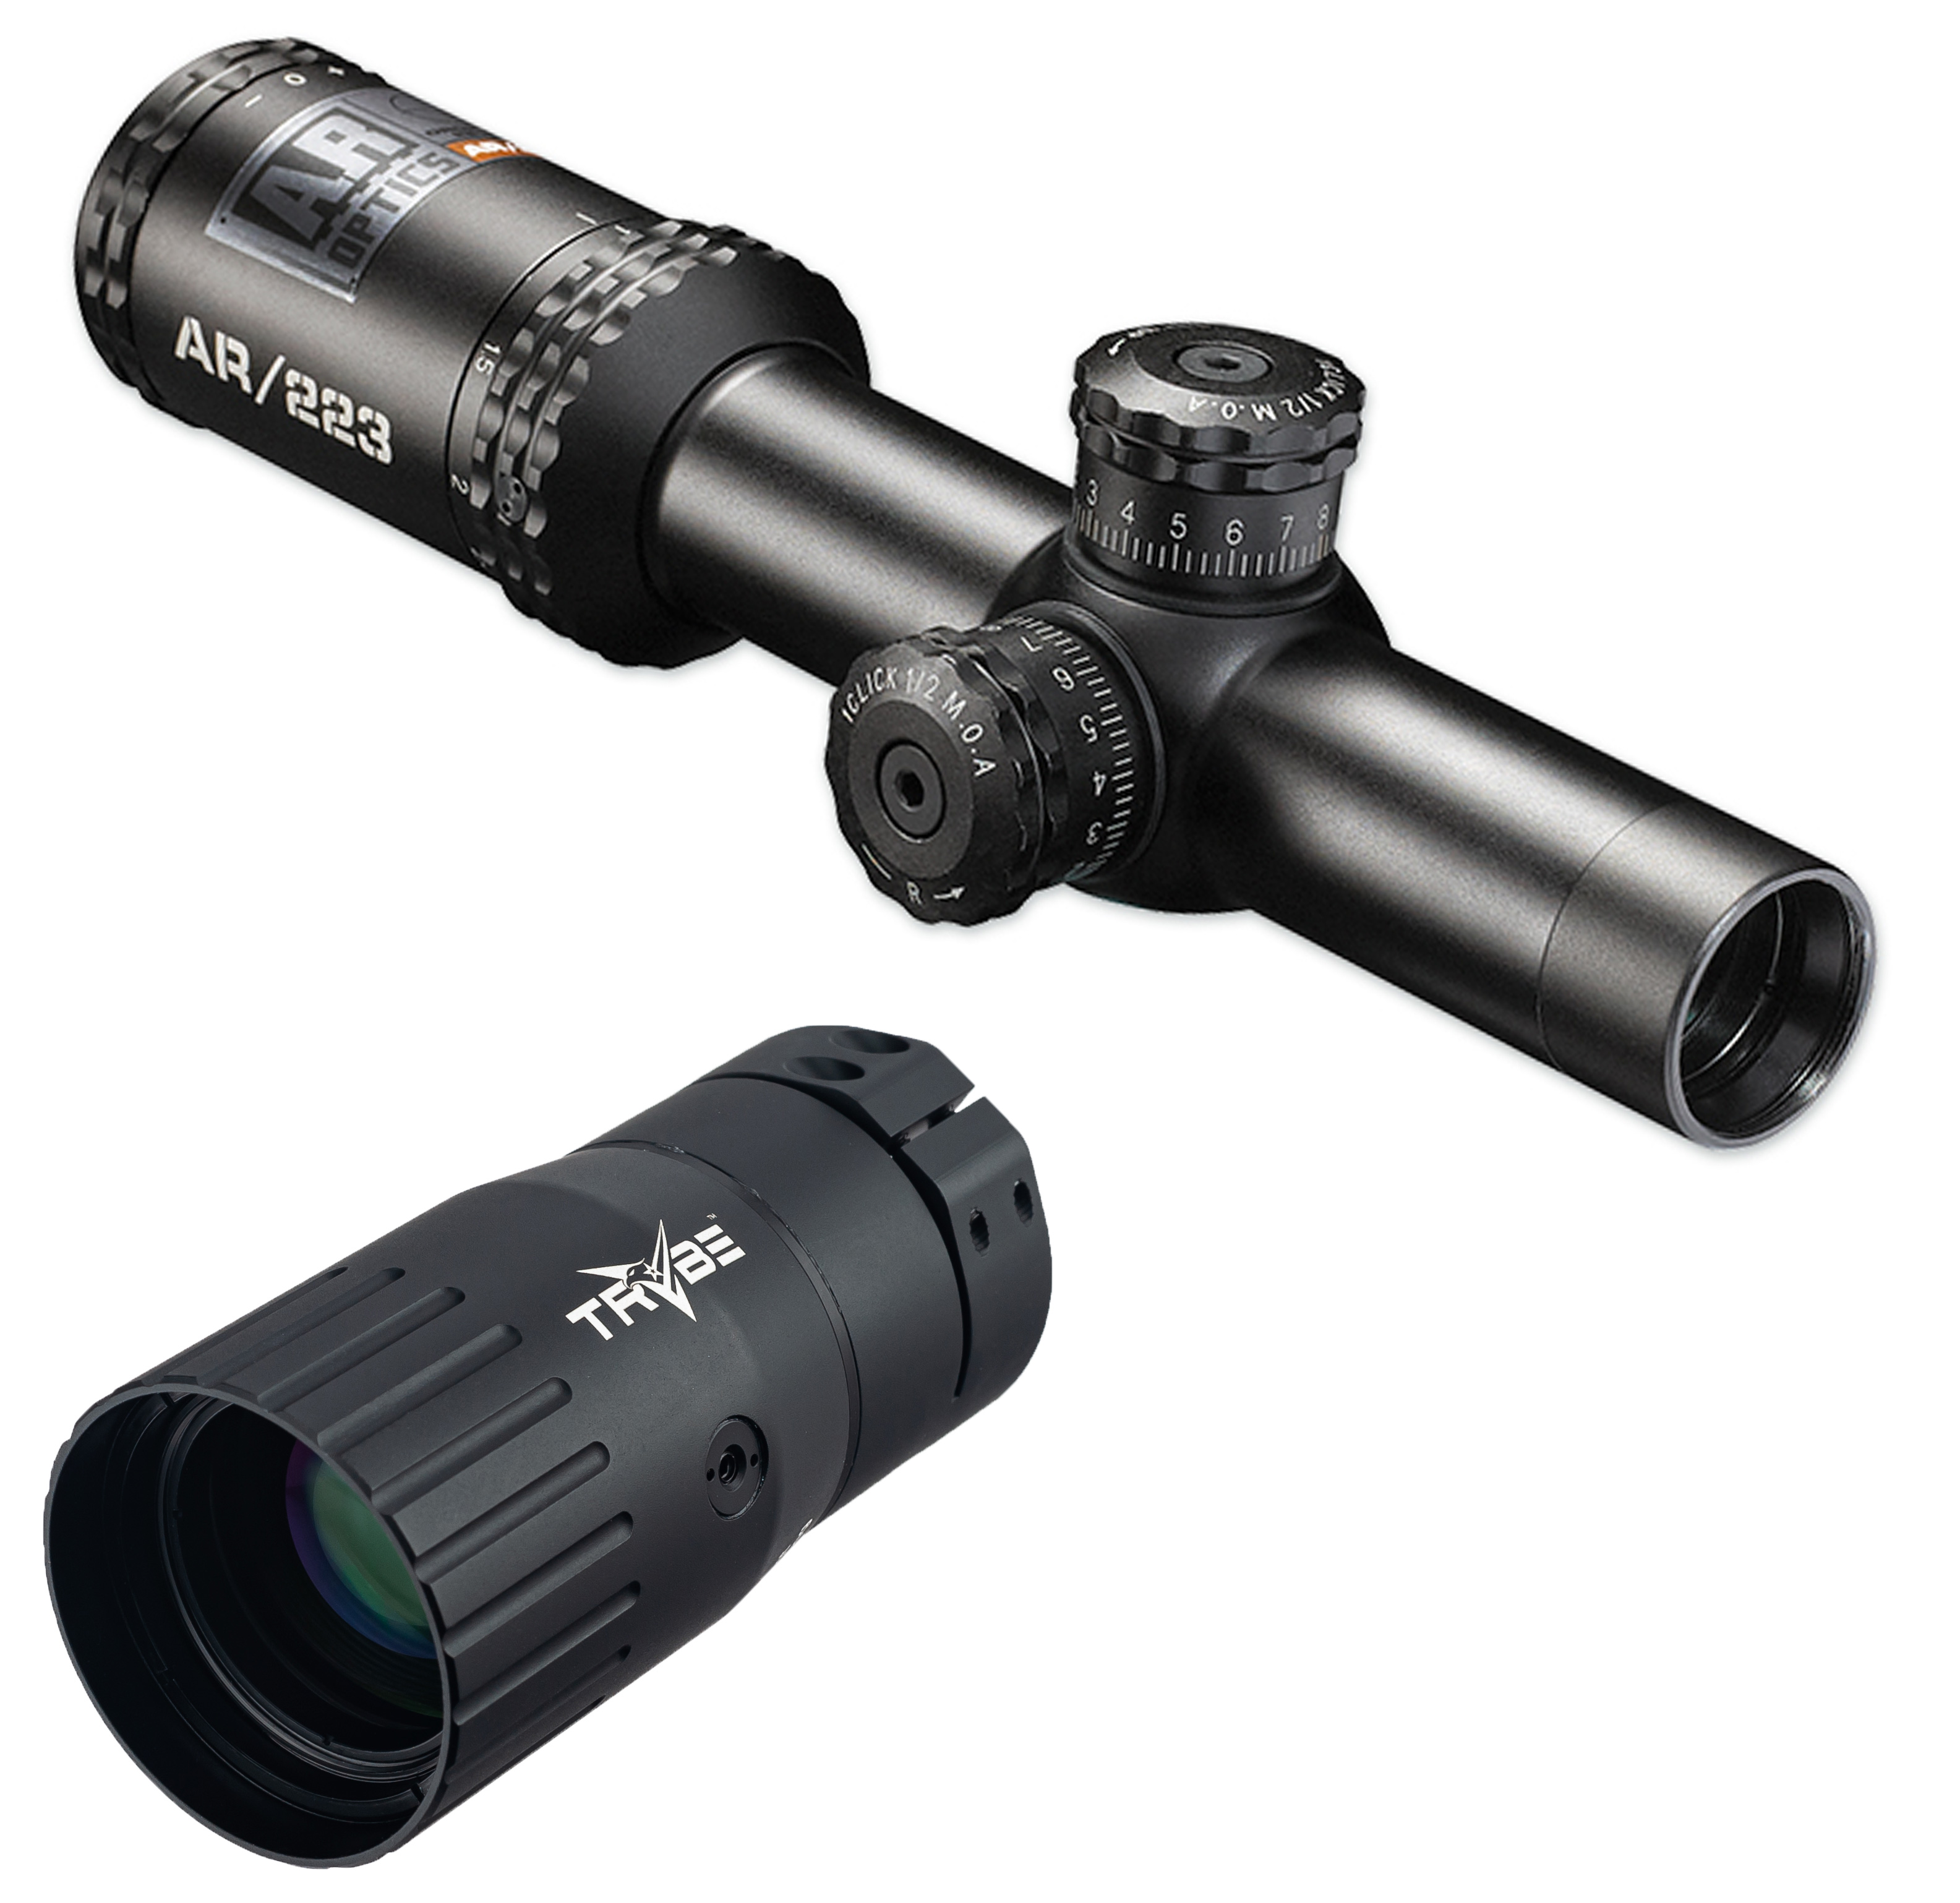 Bushnell 1-4x 24mm AR Optics Drop Zone-223 Reticle Riflescope with Target Turret